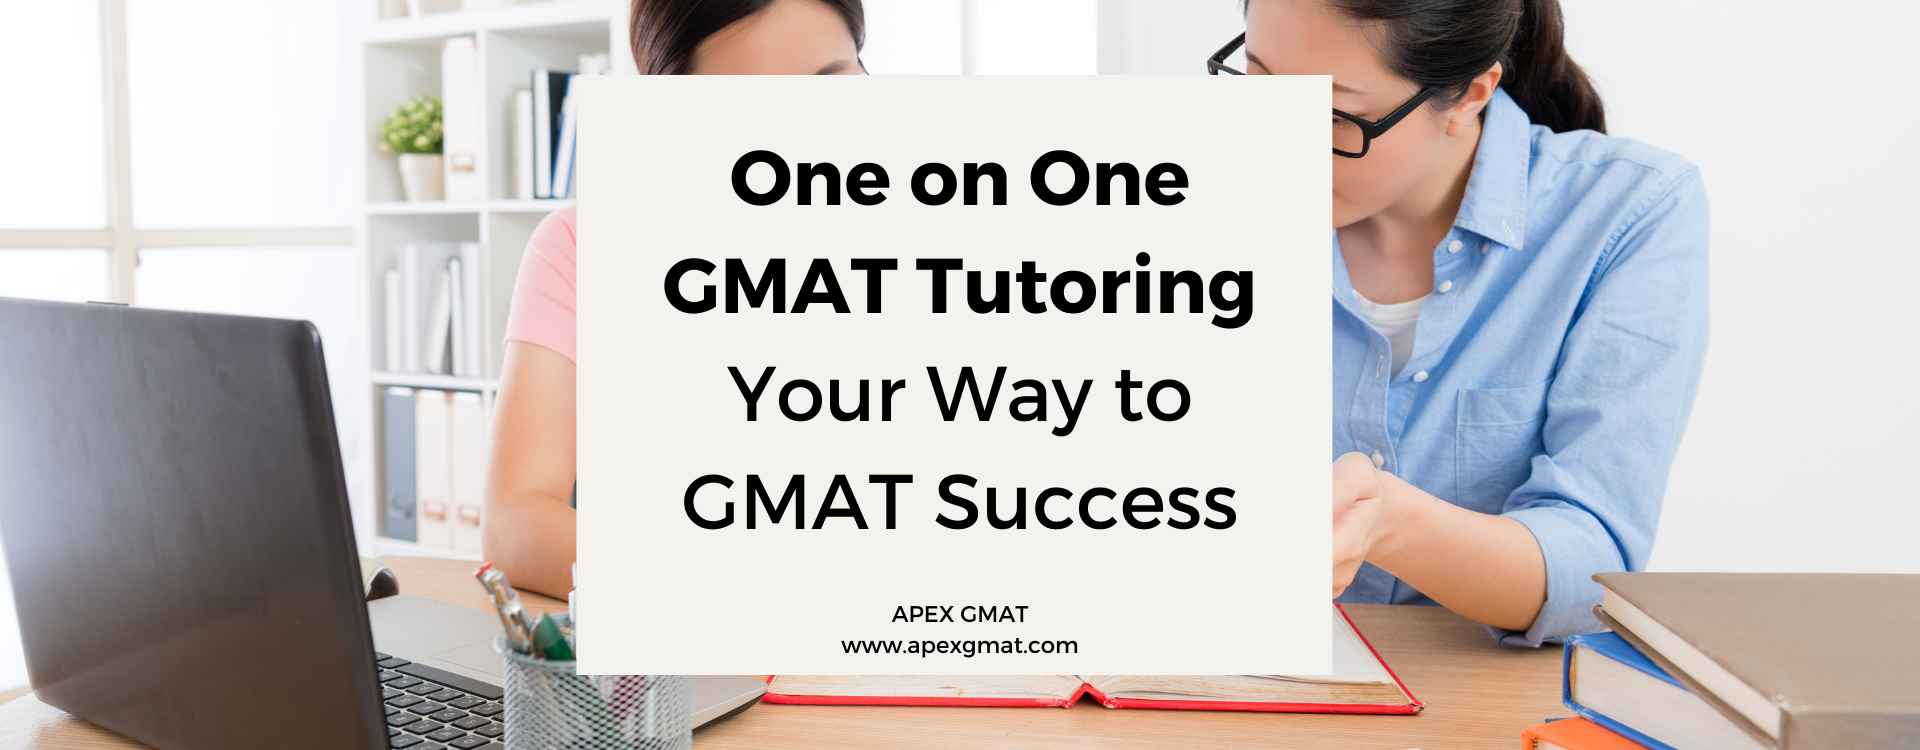 One on One GMAT Tutoring: Your Way to GMAT Success